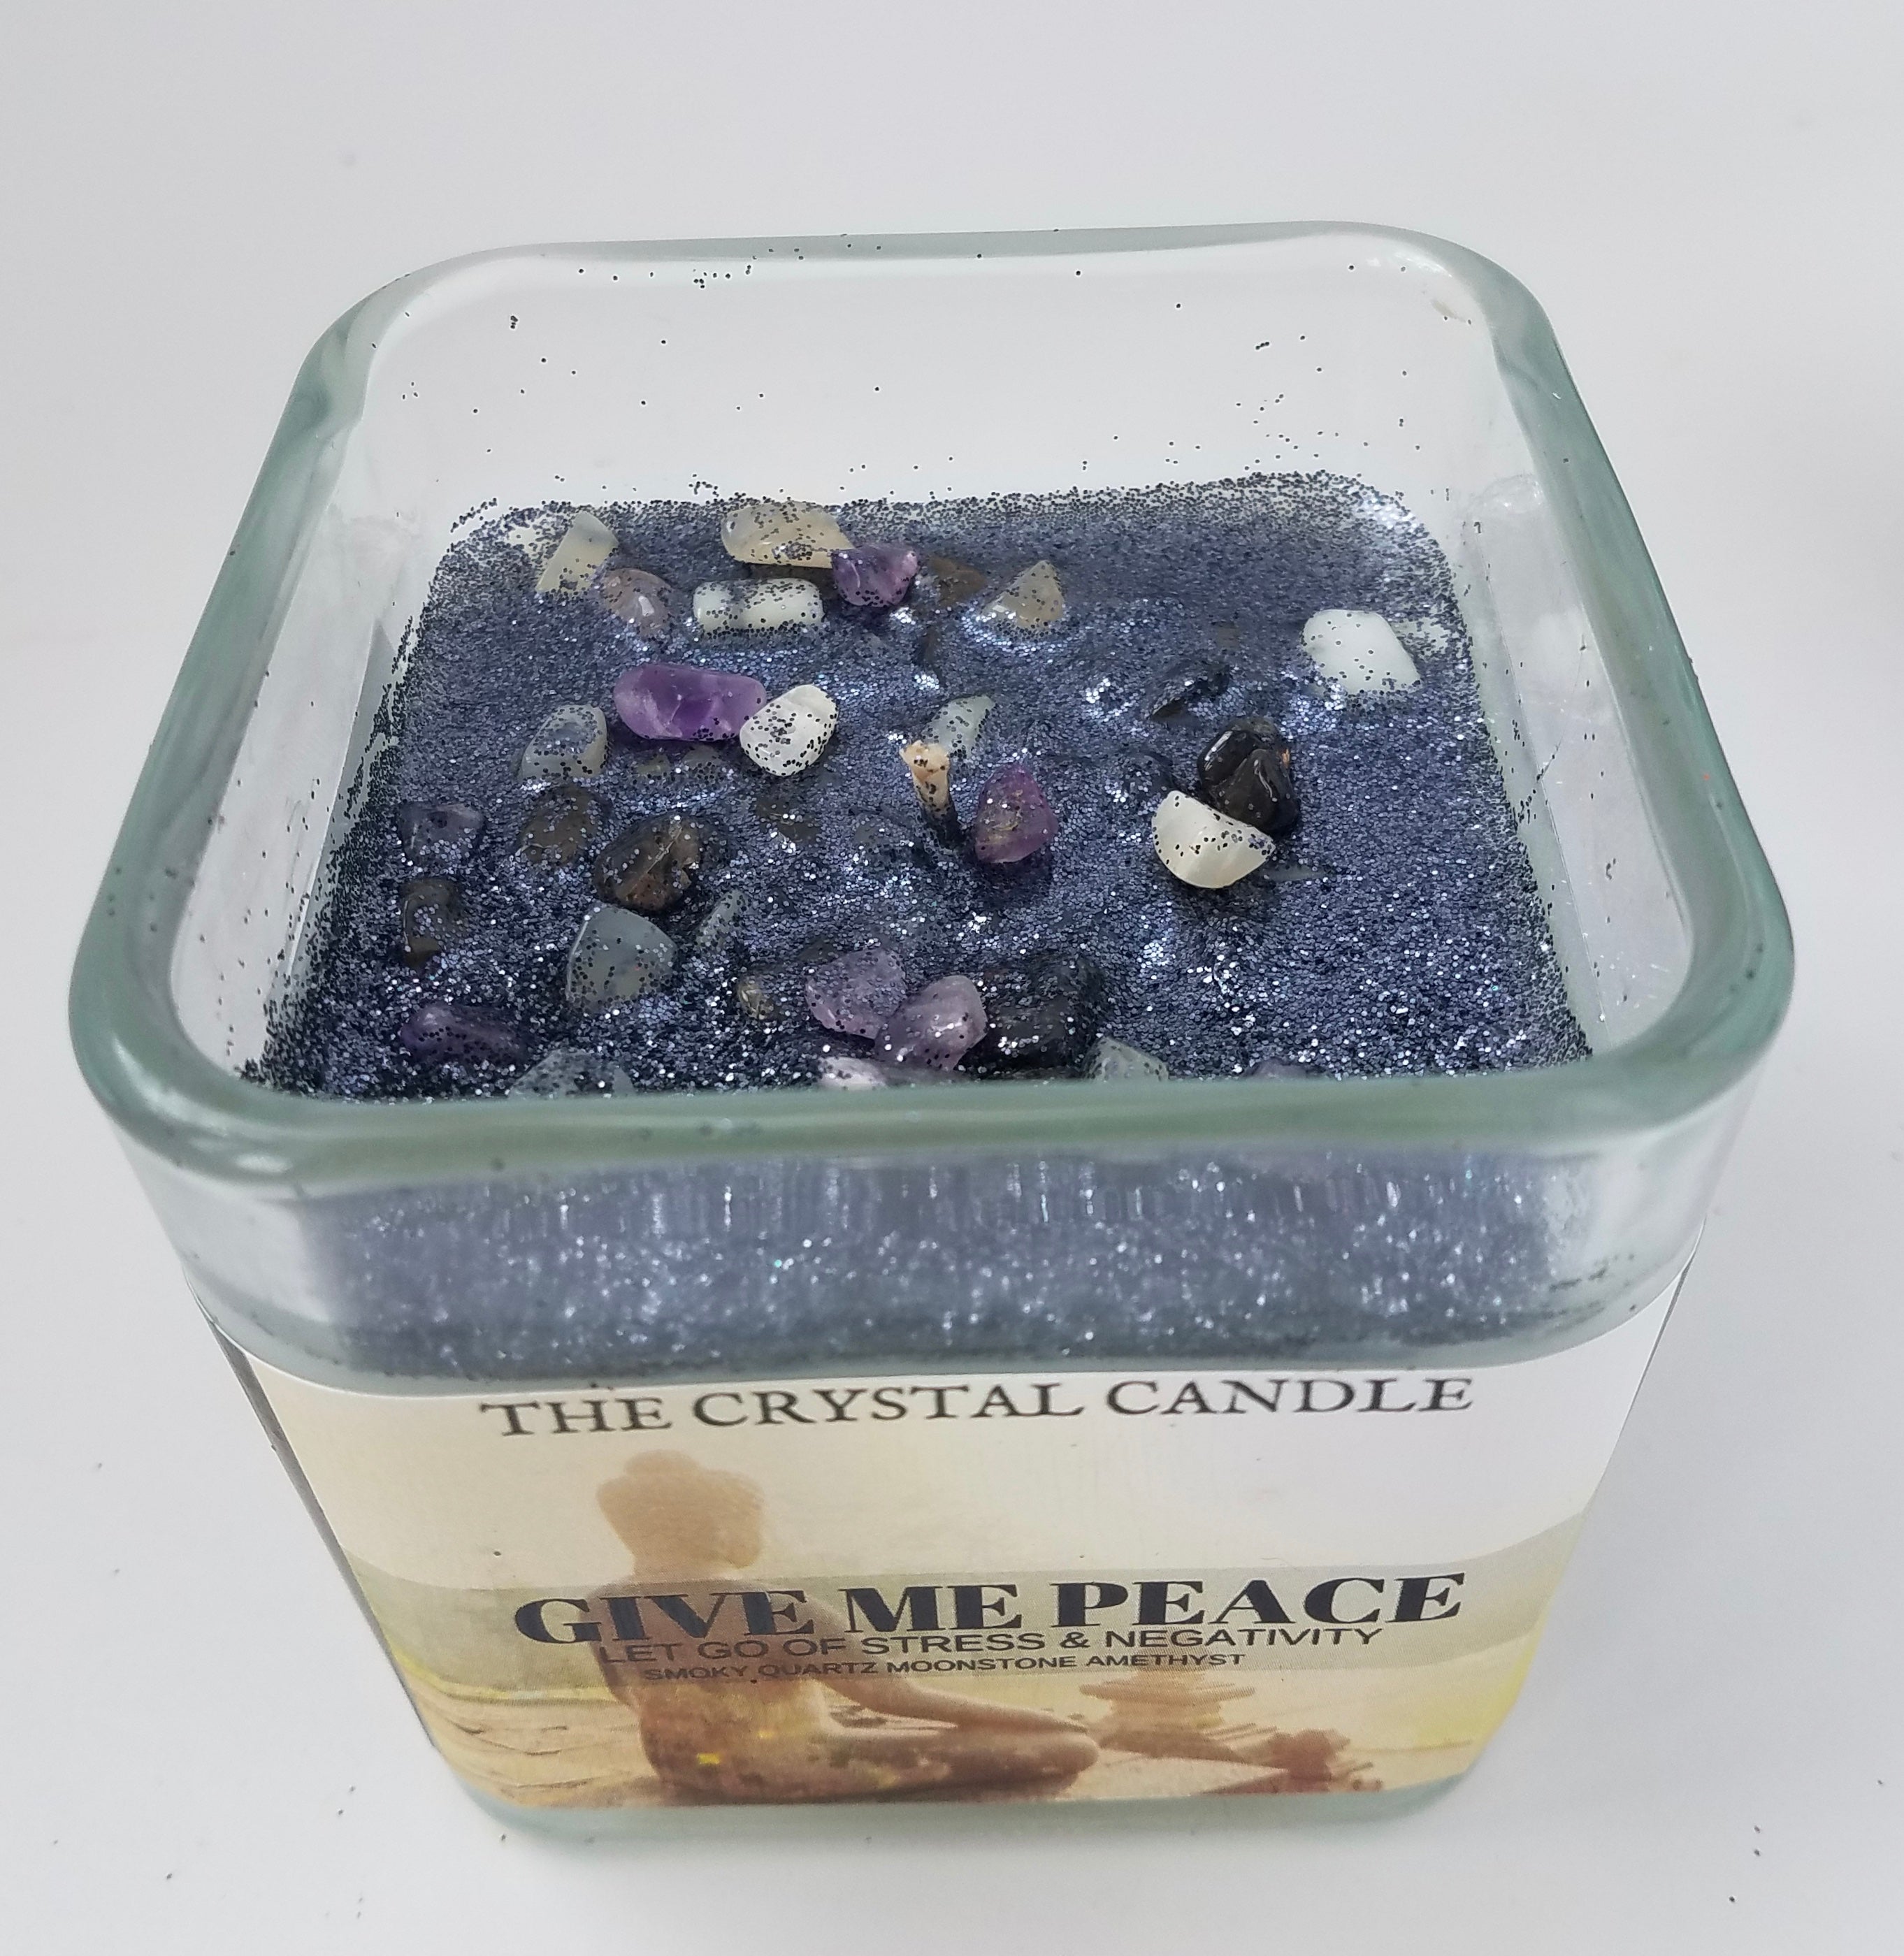 Give Me Peace- Candle To Let Go Of Stress & Negativity